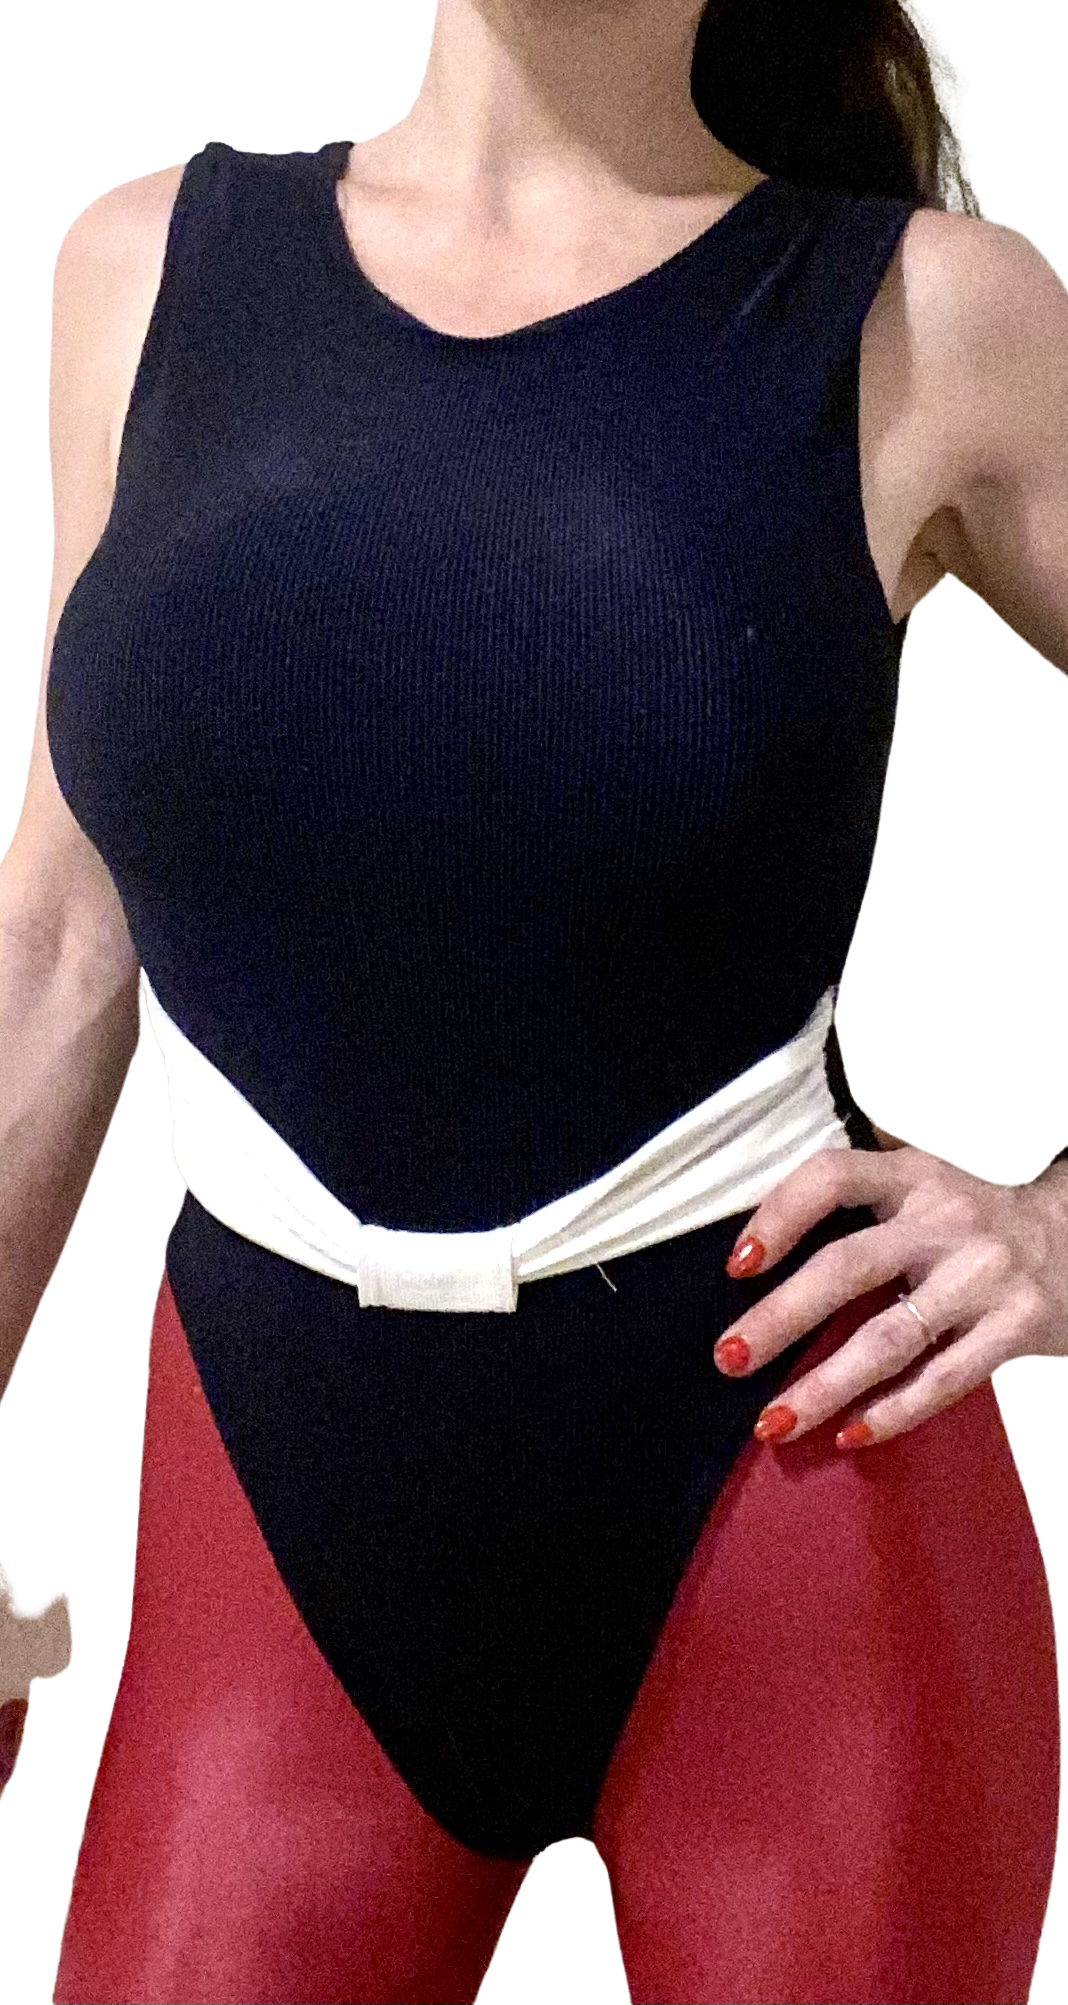 Only Leotards : Jayne M - Aerobic workout in a thong leotard !!